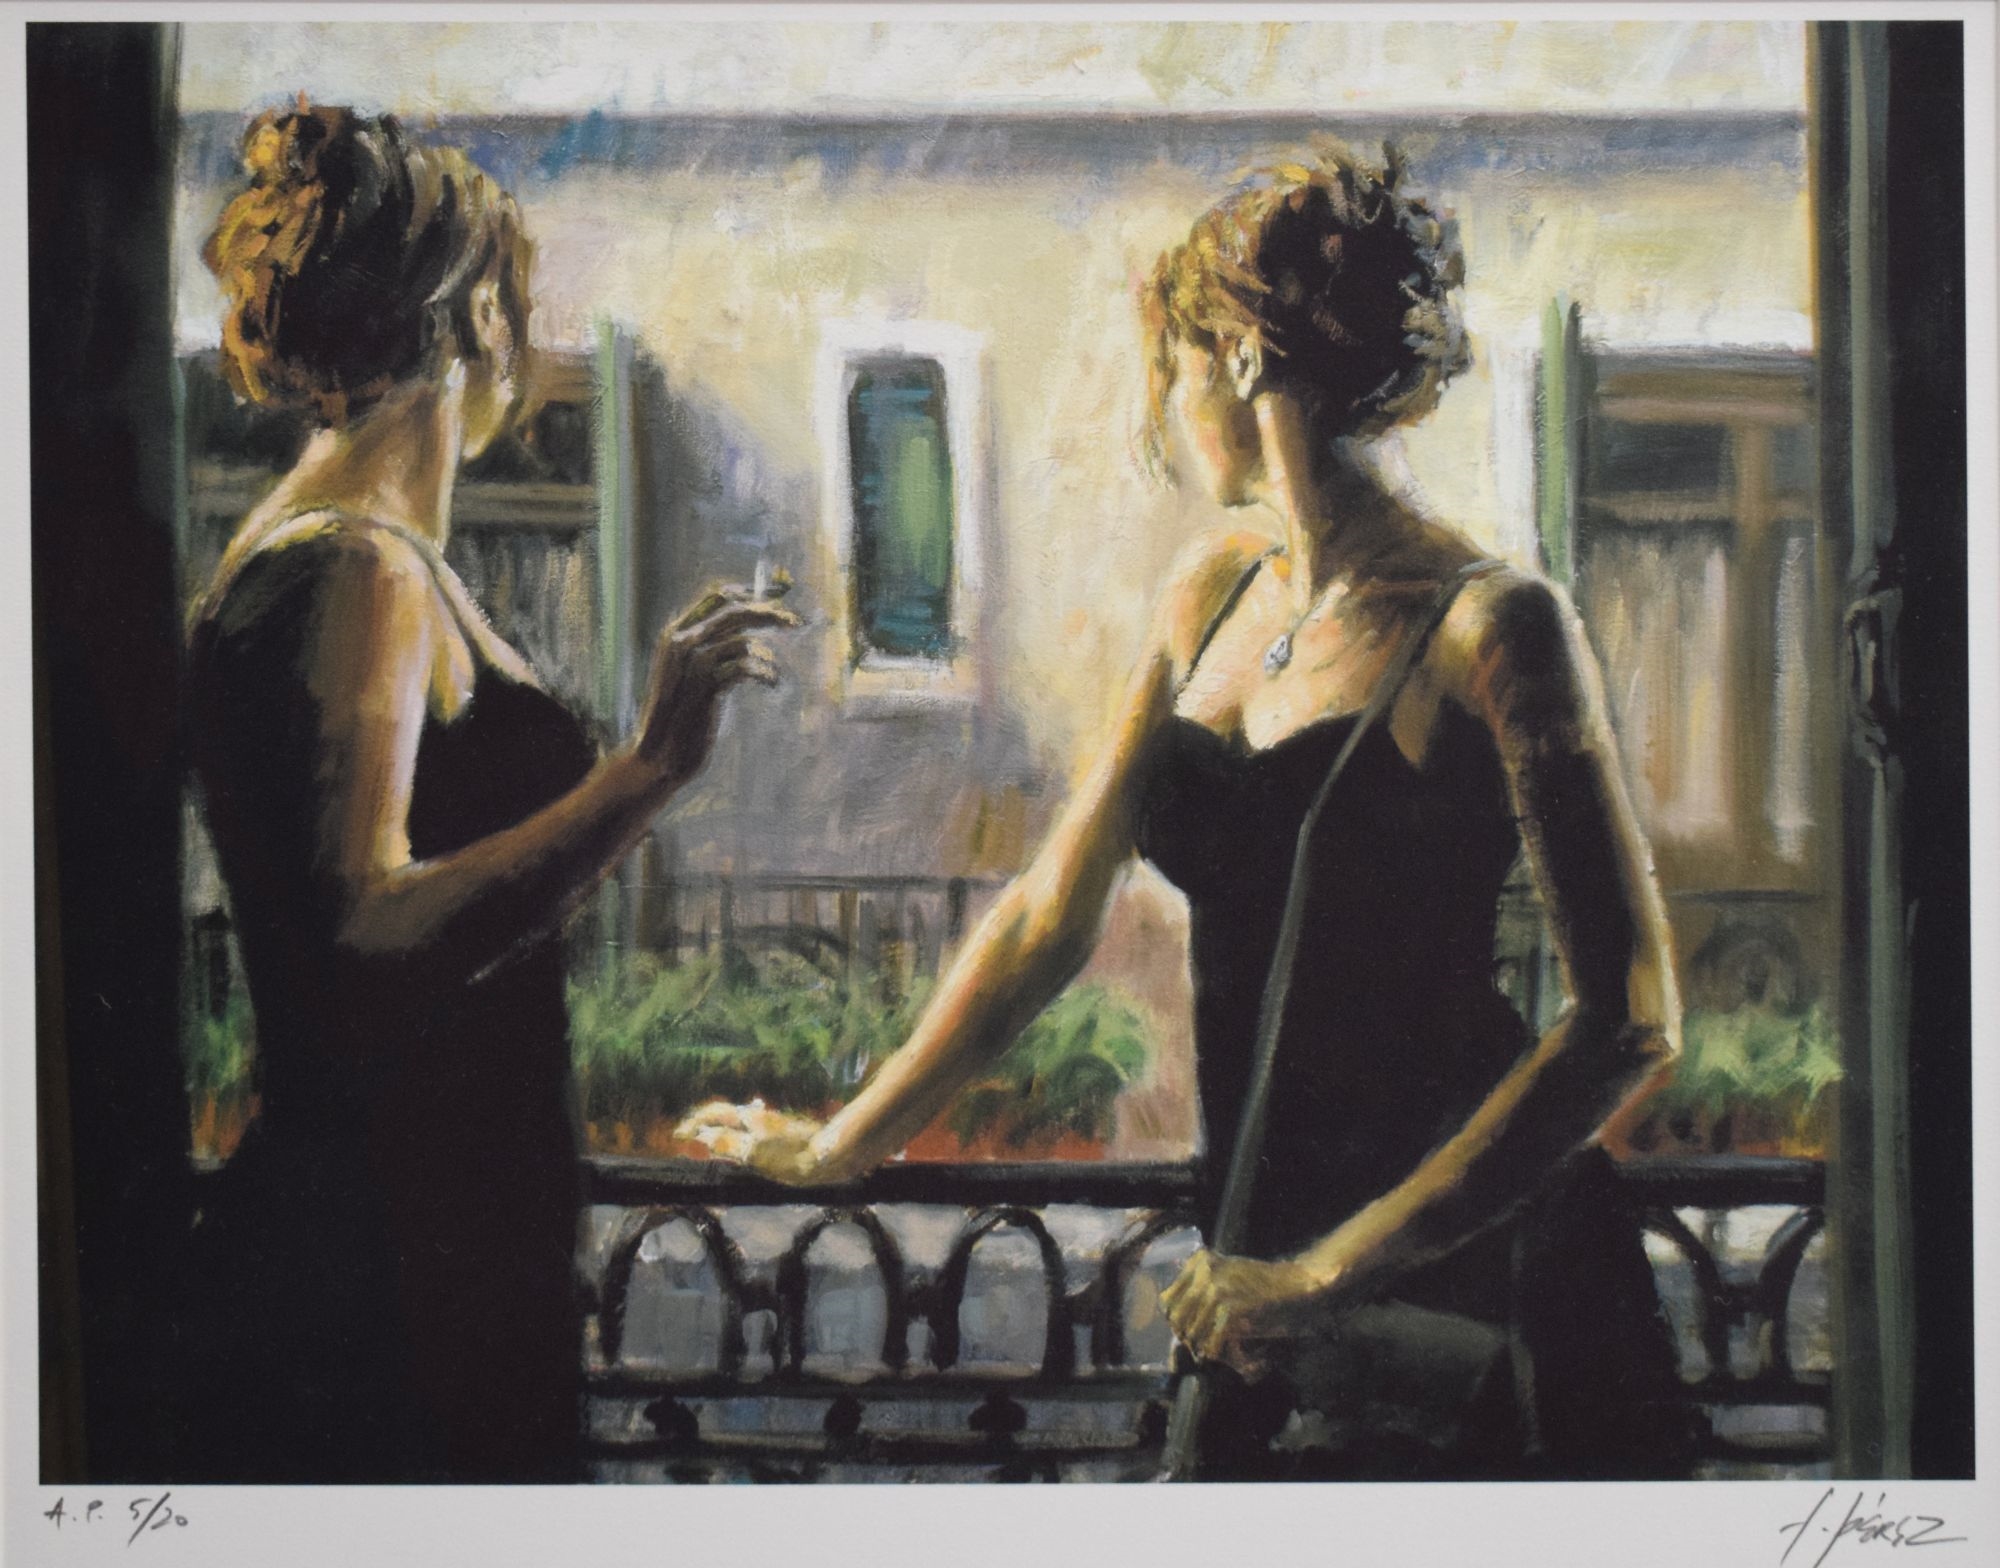 Buenos Aires IV by Fabian Perez